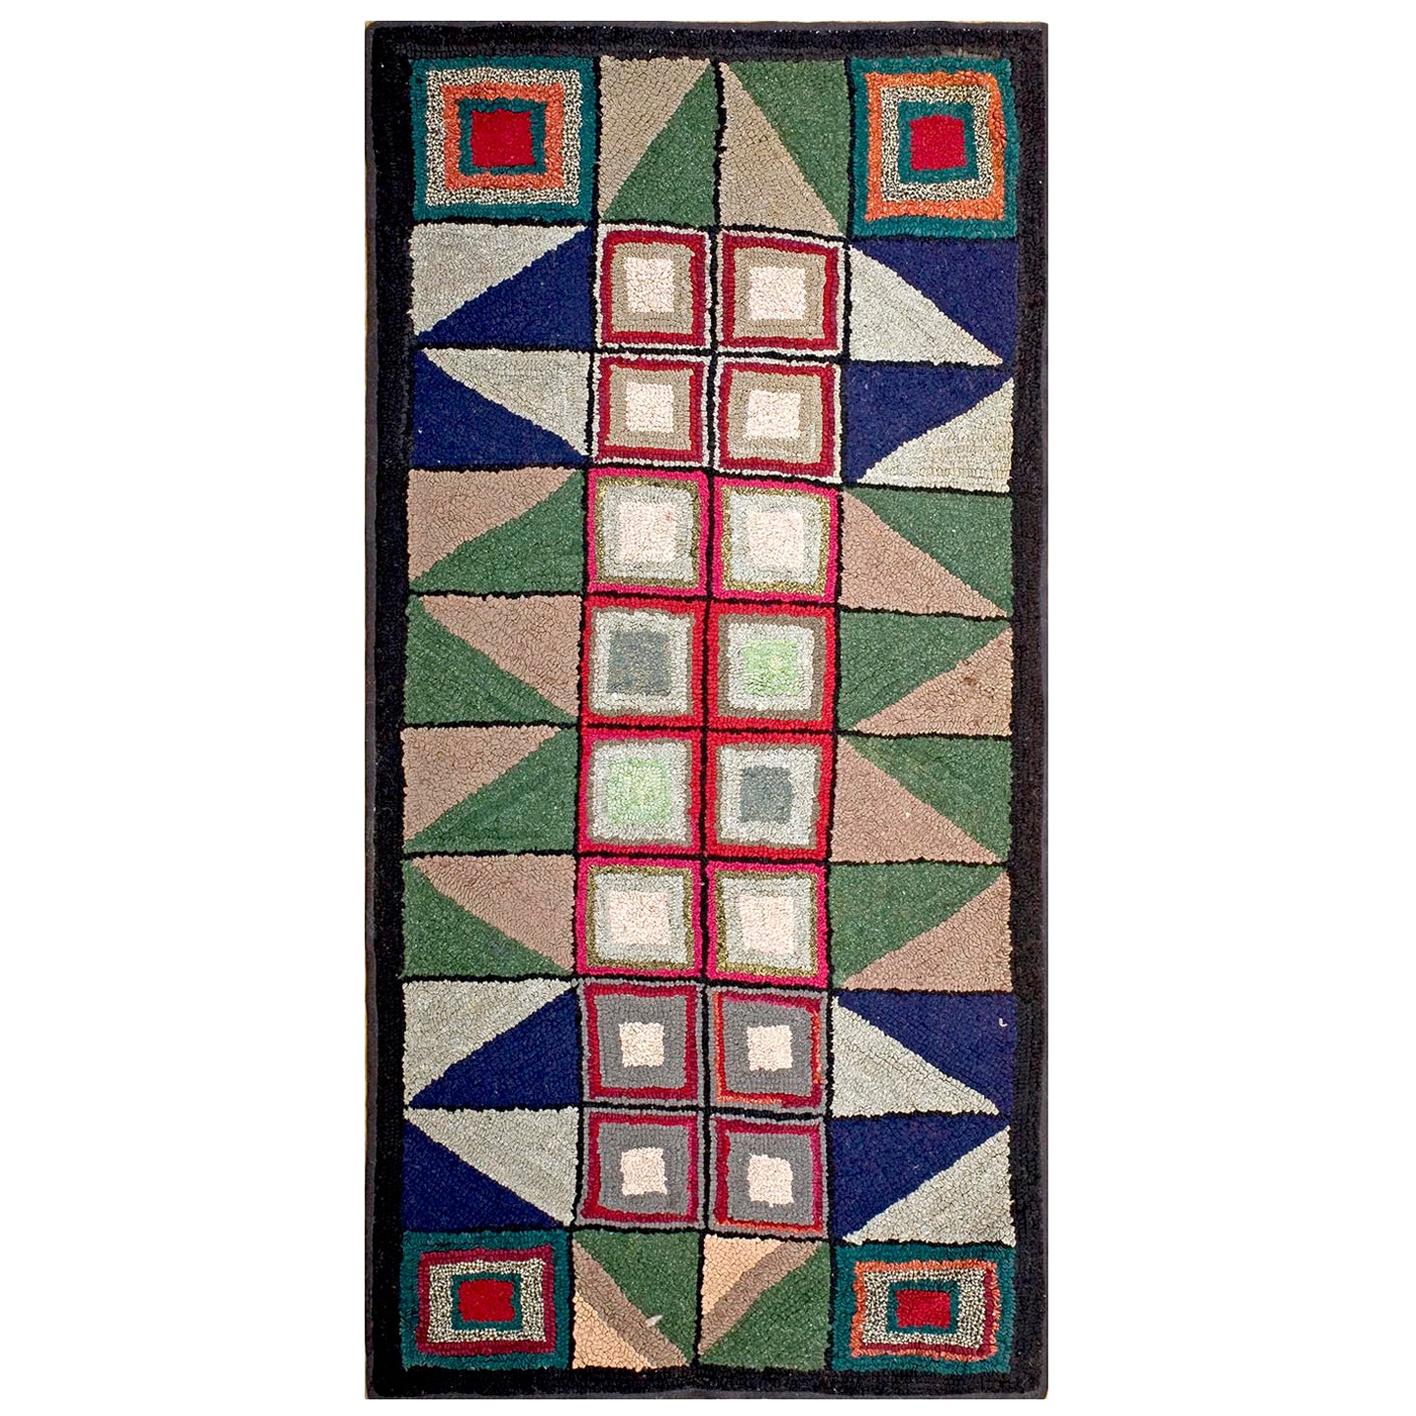 Antique American Hooked Rug 3' 2" x 6' 4"